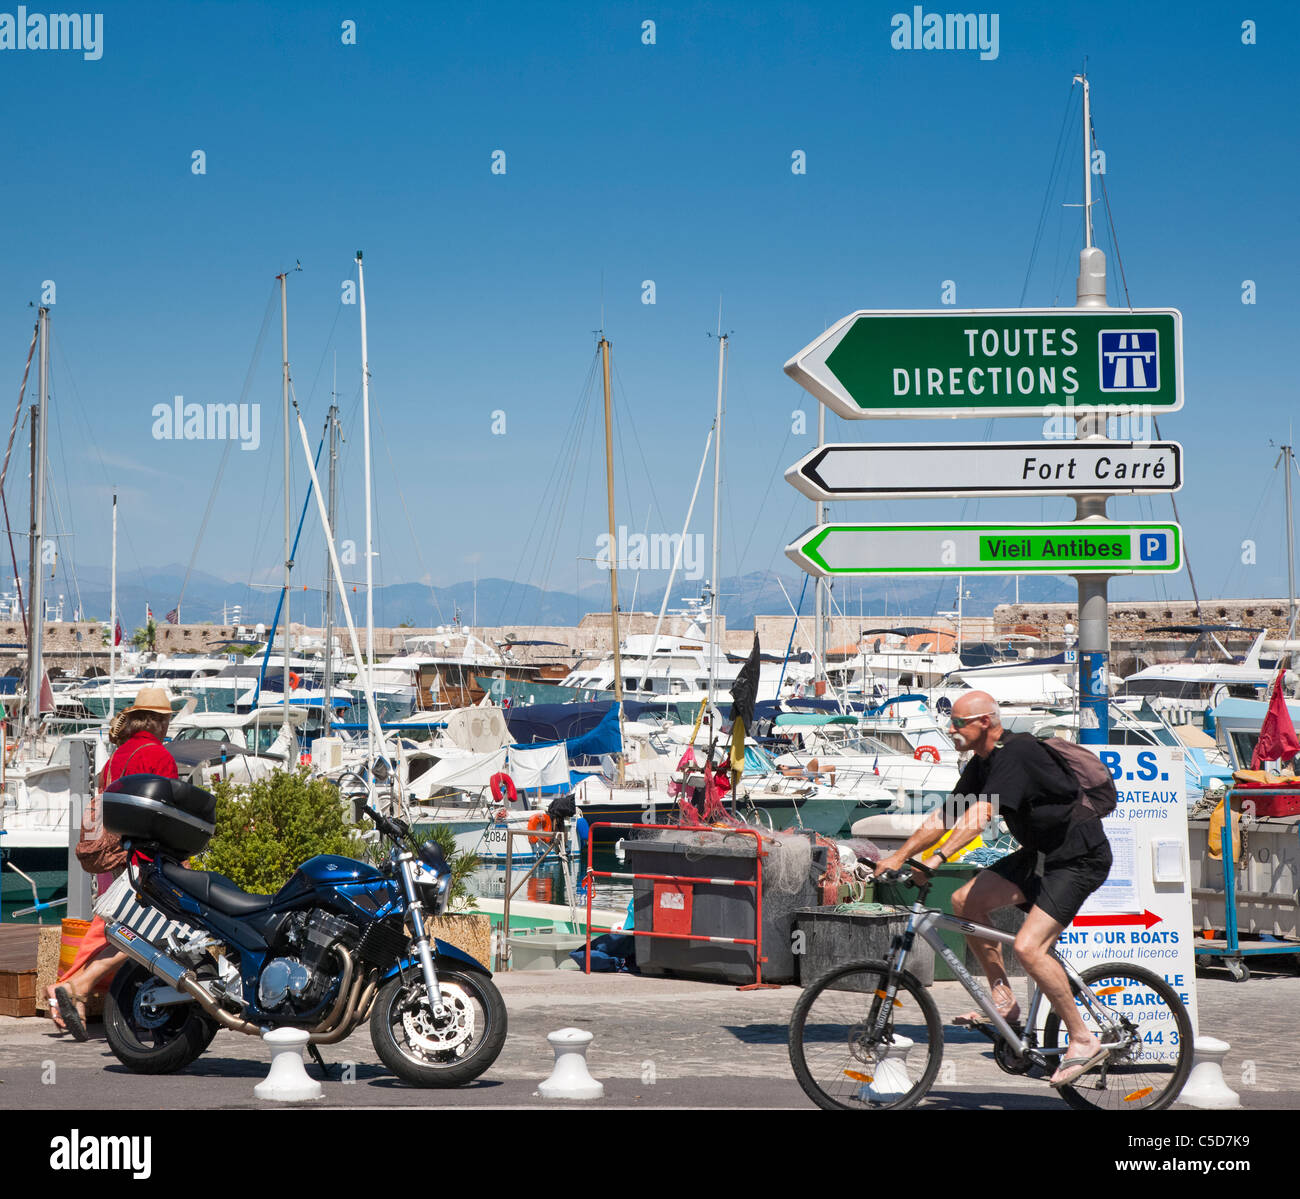 Cyclist and motorbike with direction sign and boats behind, Antibes, france Stock Photo